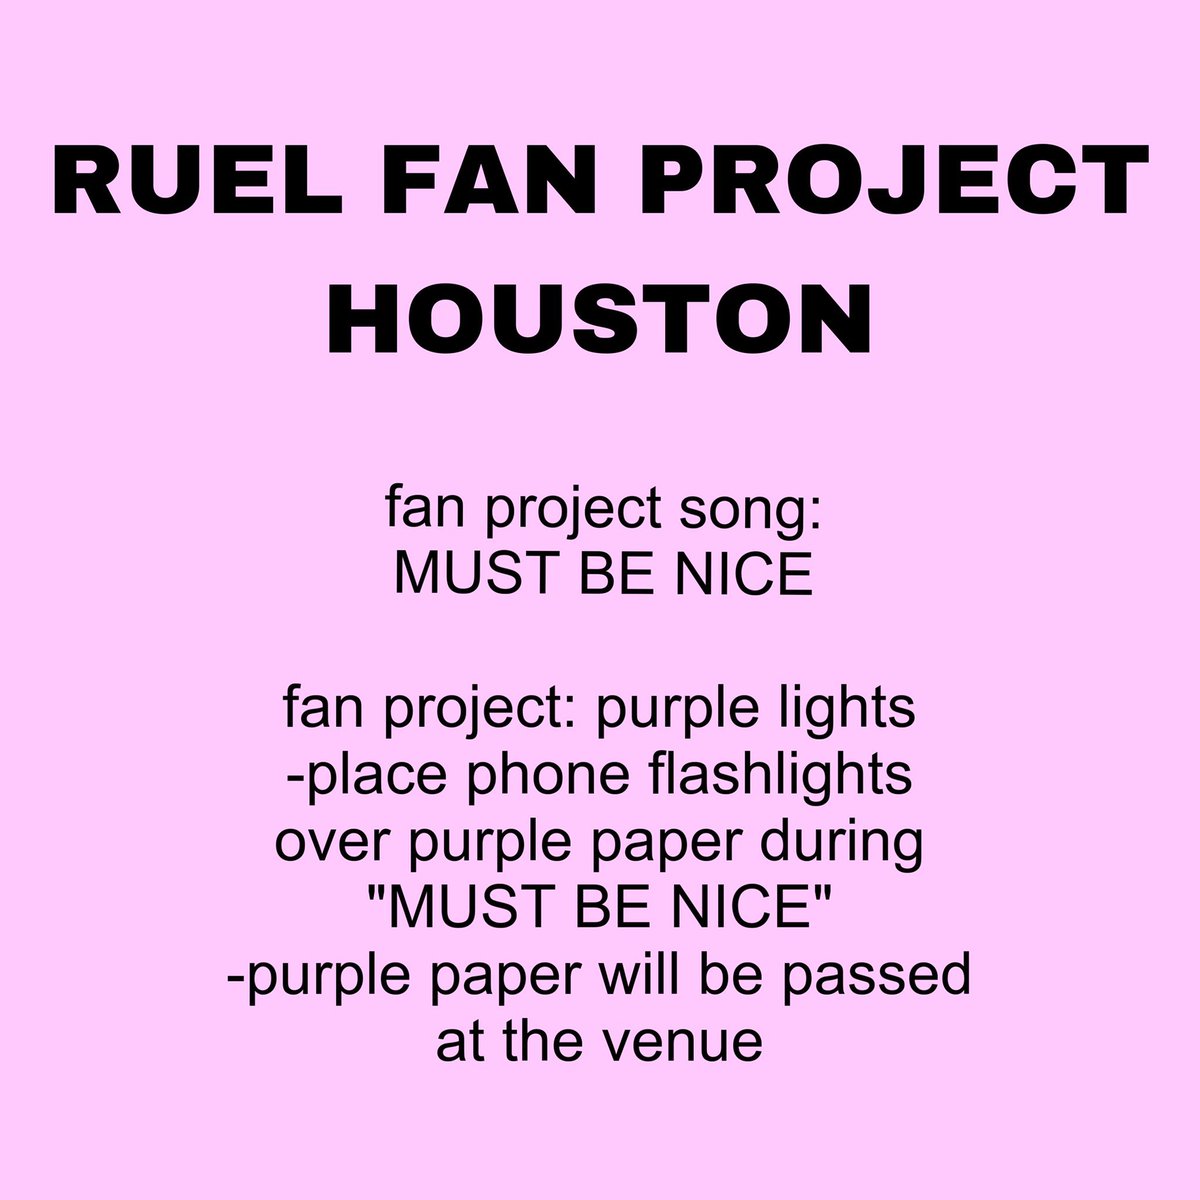 FAN PROJECT FOR THE HOUSTON SHOW #4thwalltour #ruel #oneruel